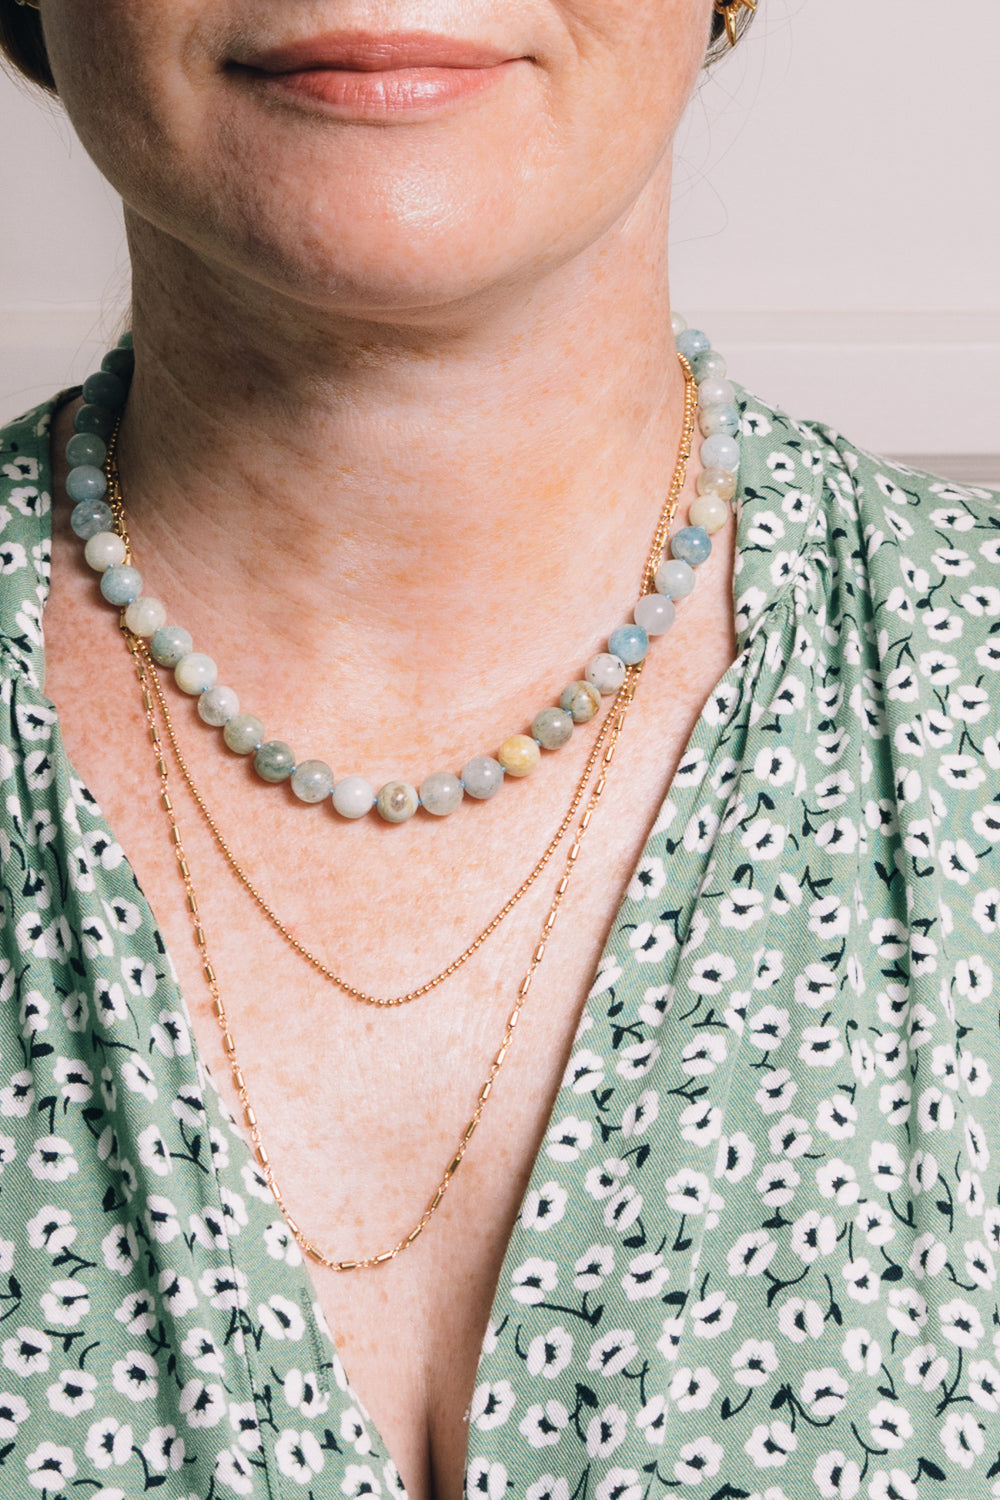 aquamarine beaded necklace with layering necklaces on model